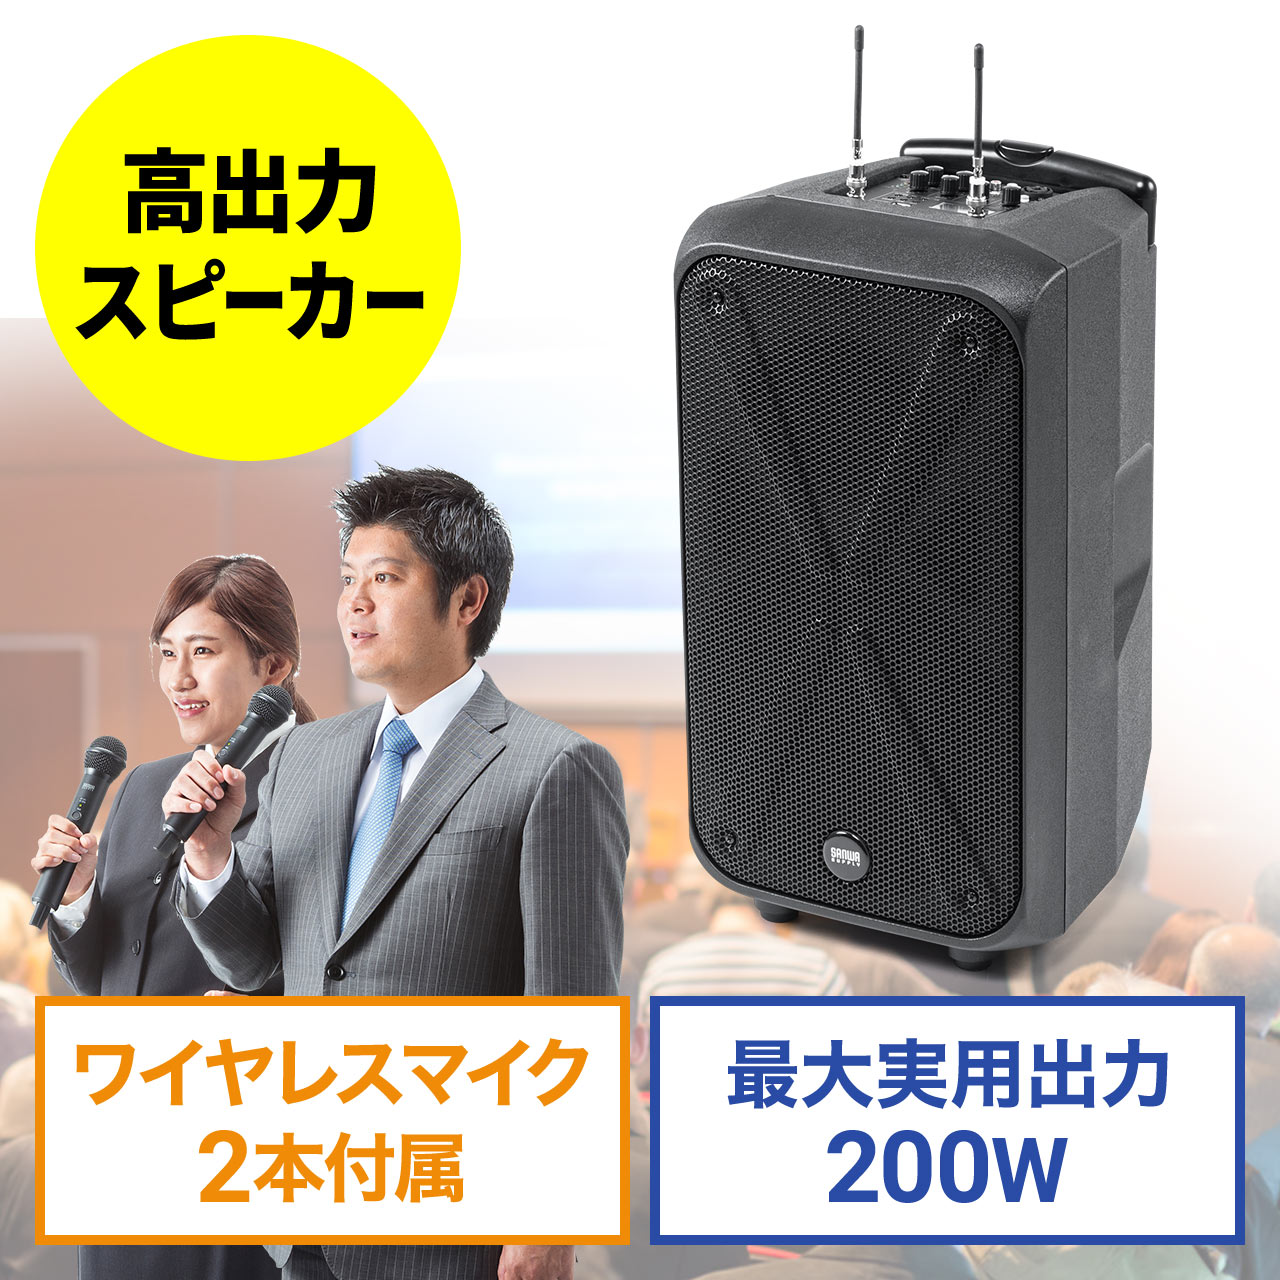 office 2019 Home & Business 二枚セットPC/タブレット - PC周辺機器